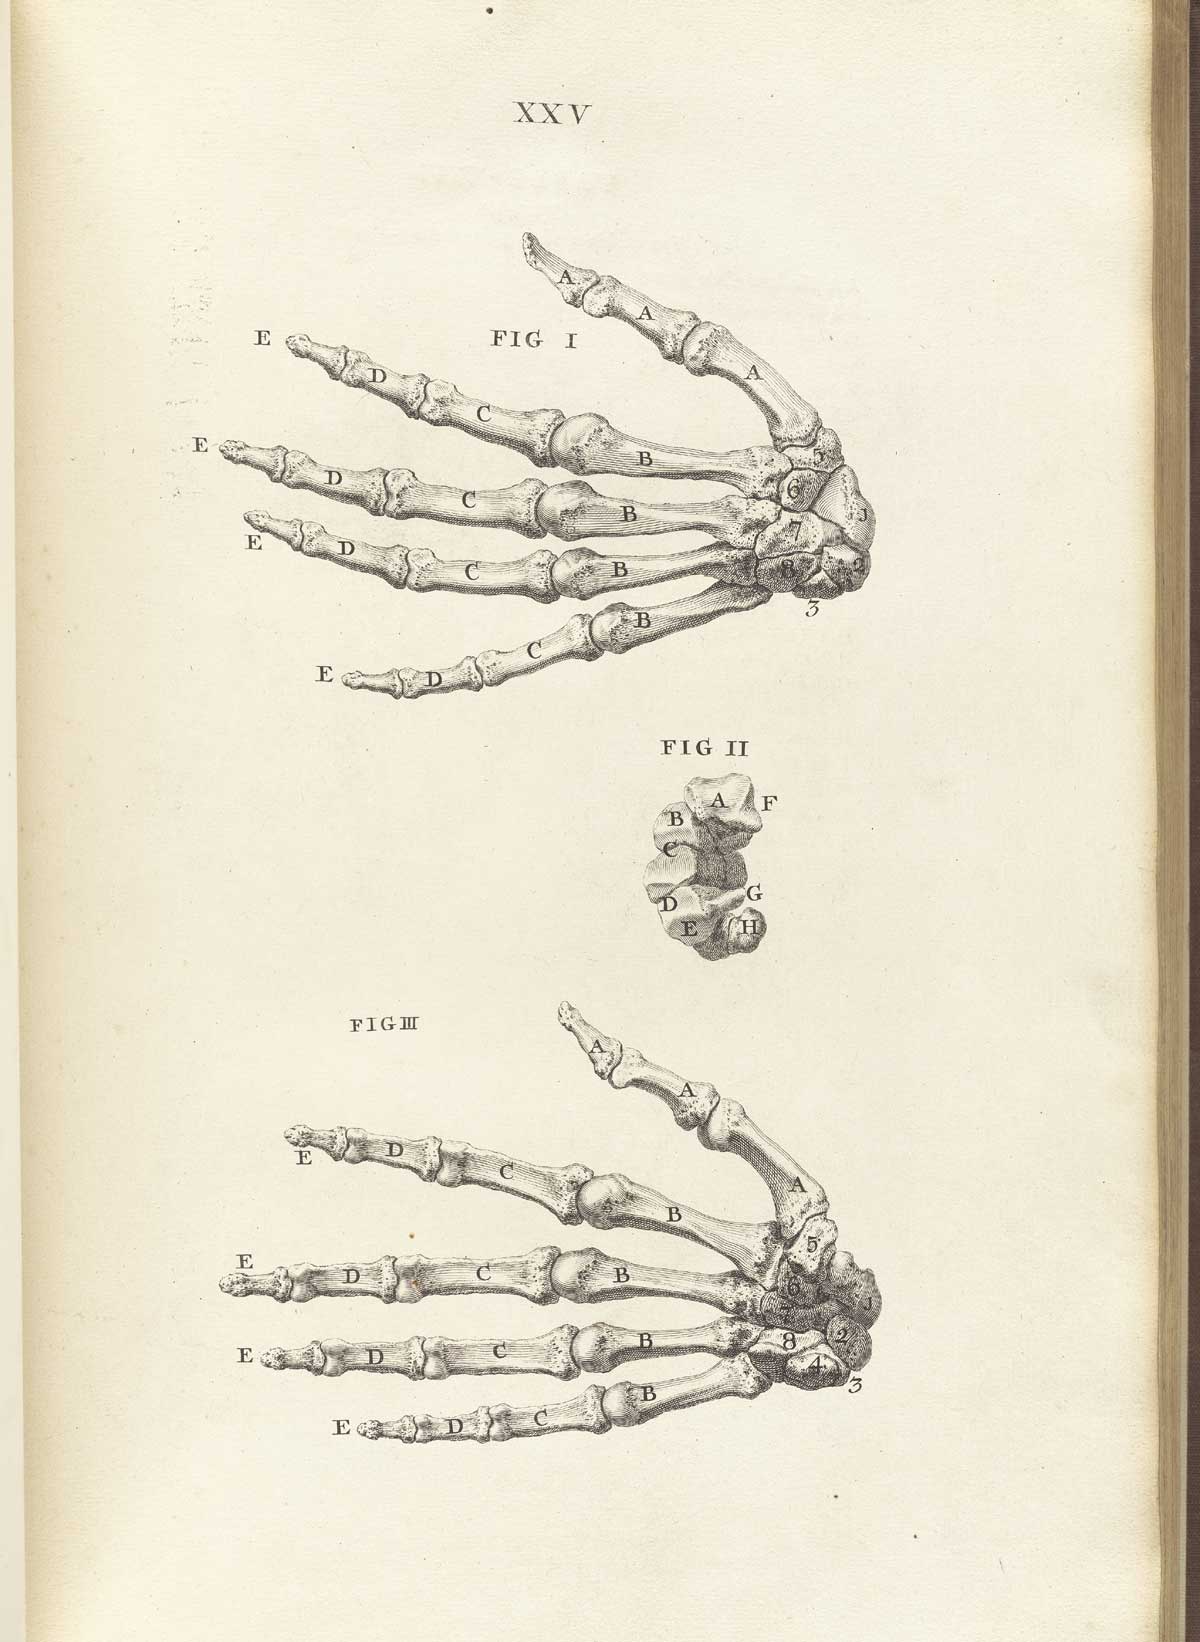 Engraving showing the internal (below) and external (above) views of the bones of the hands, from William Cheselden’s Osteographia, NLM Call no.: WZ 260 C499o 1733.